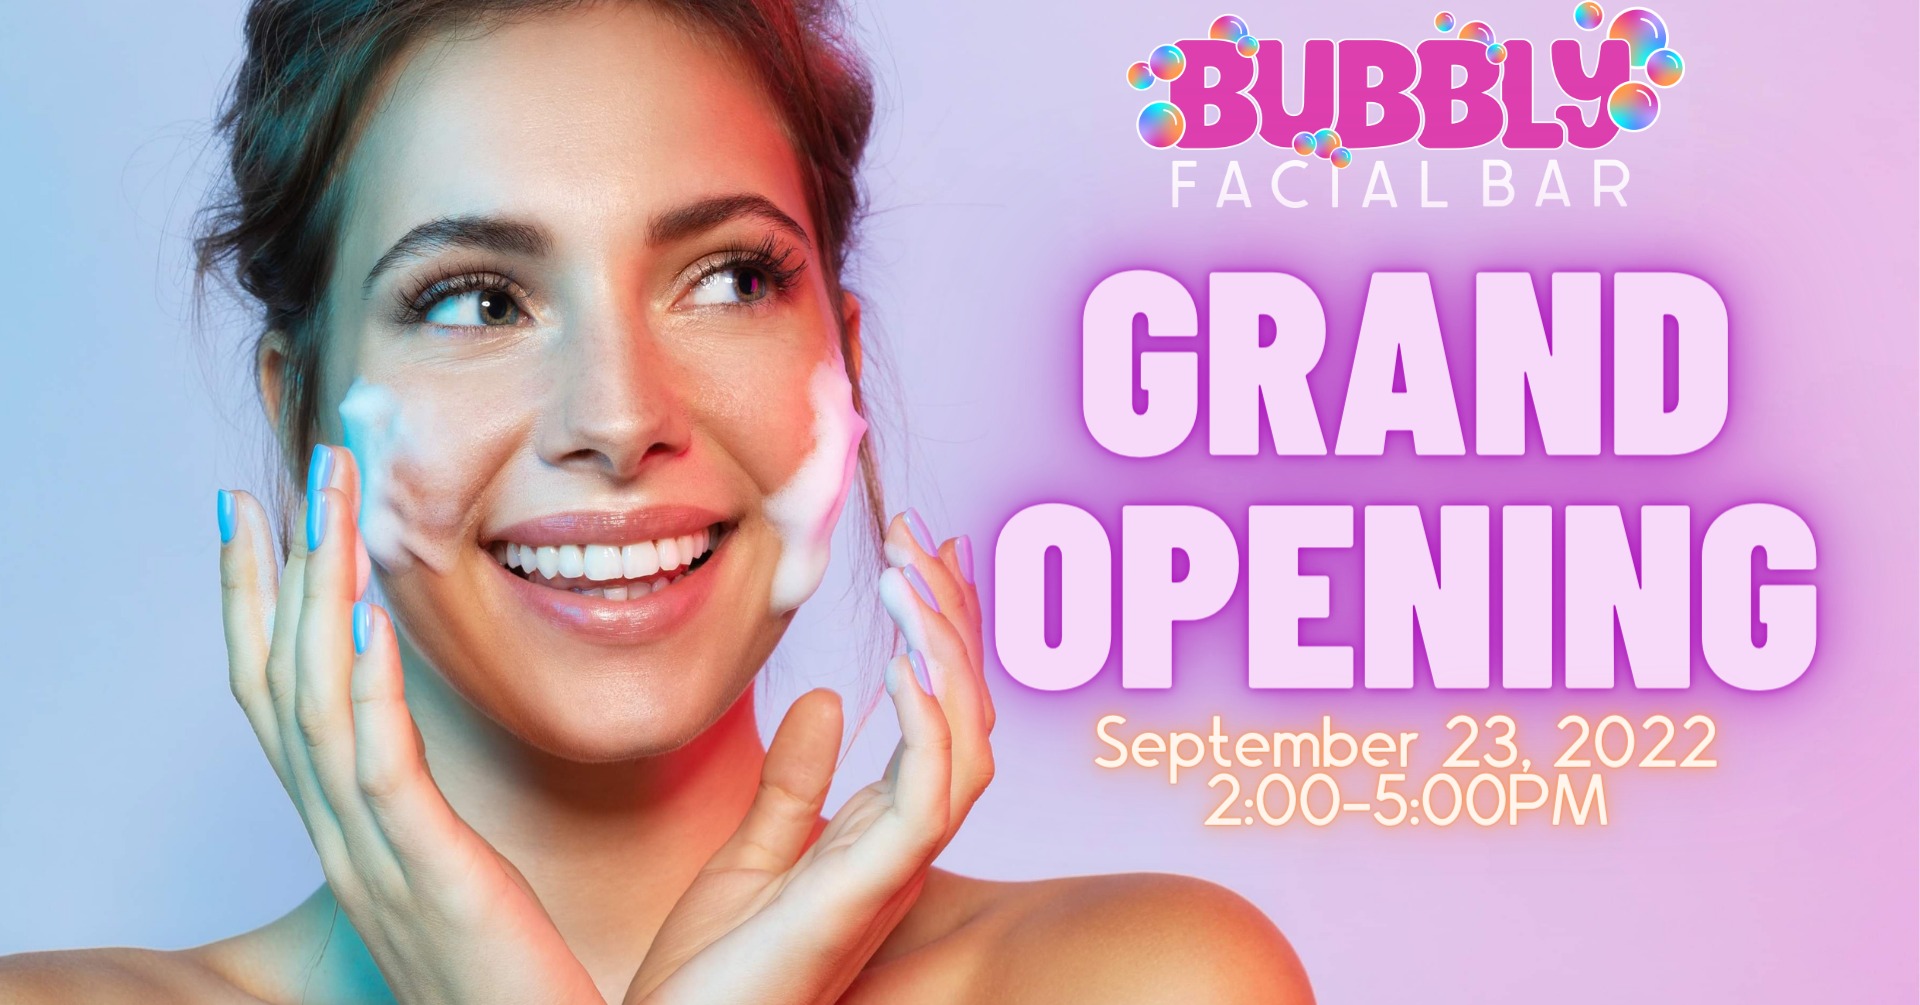 The Bubbly Facial Bar Grand Opening in Meridian, Idaho